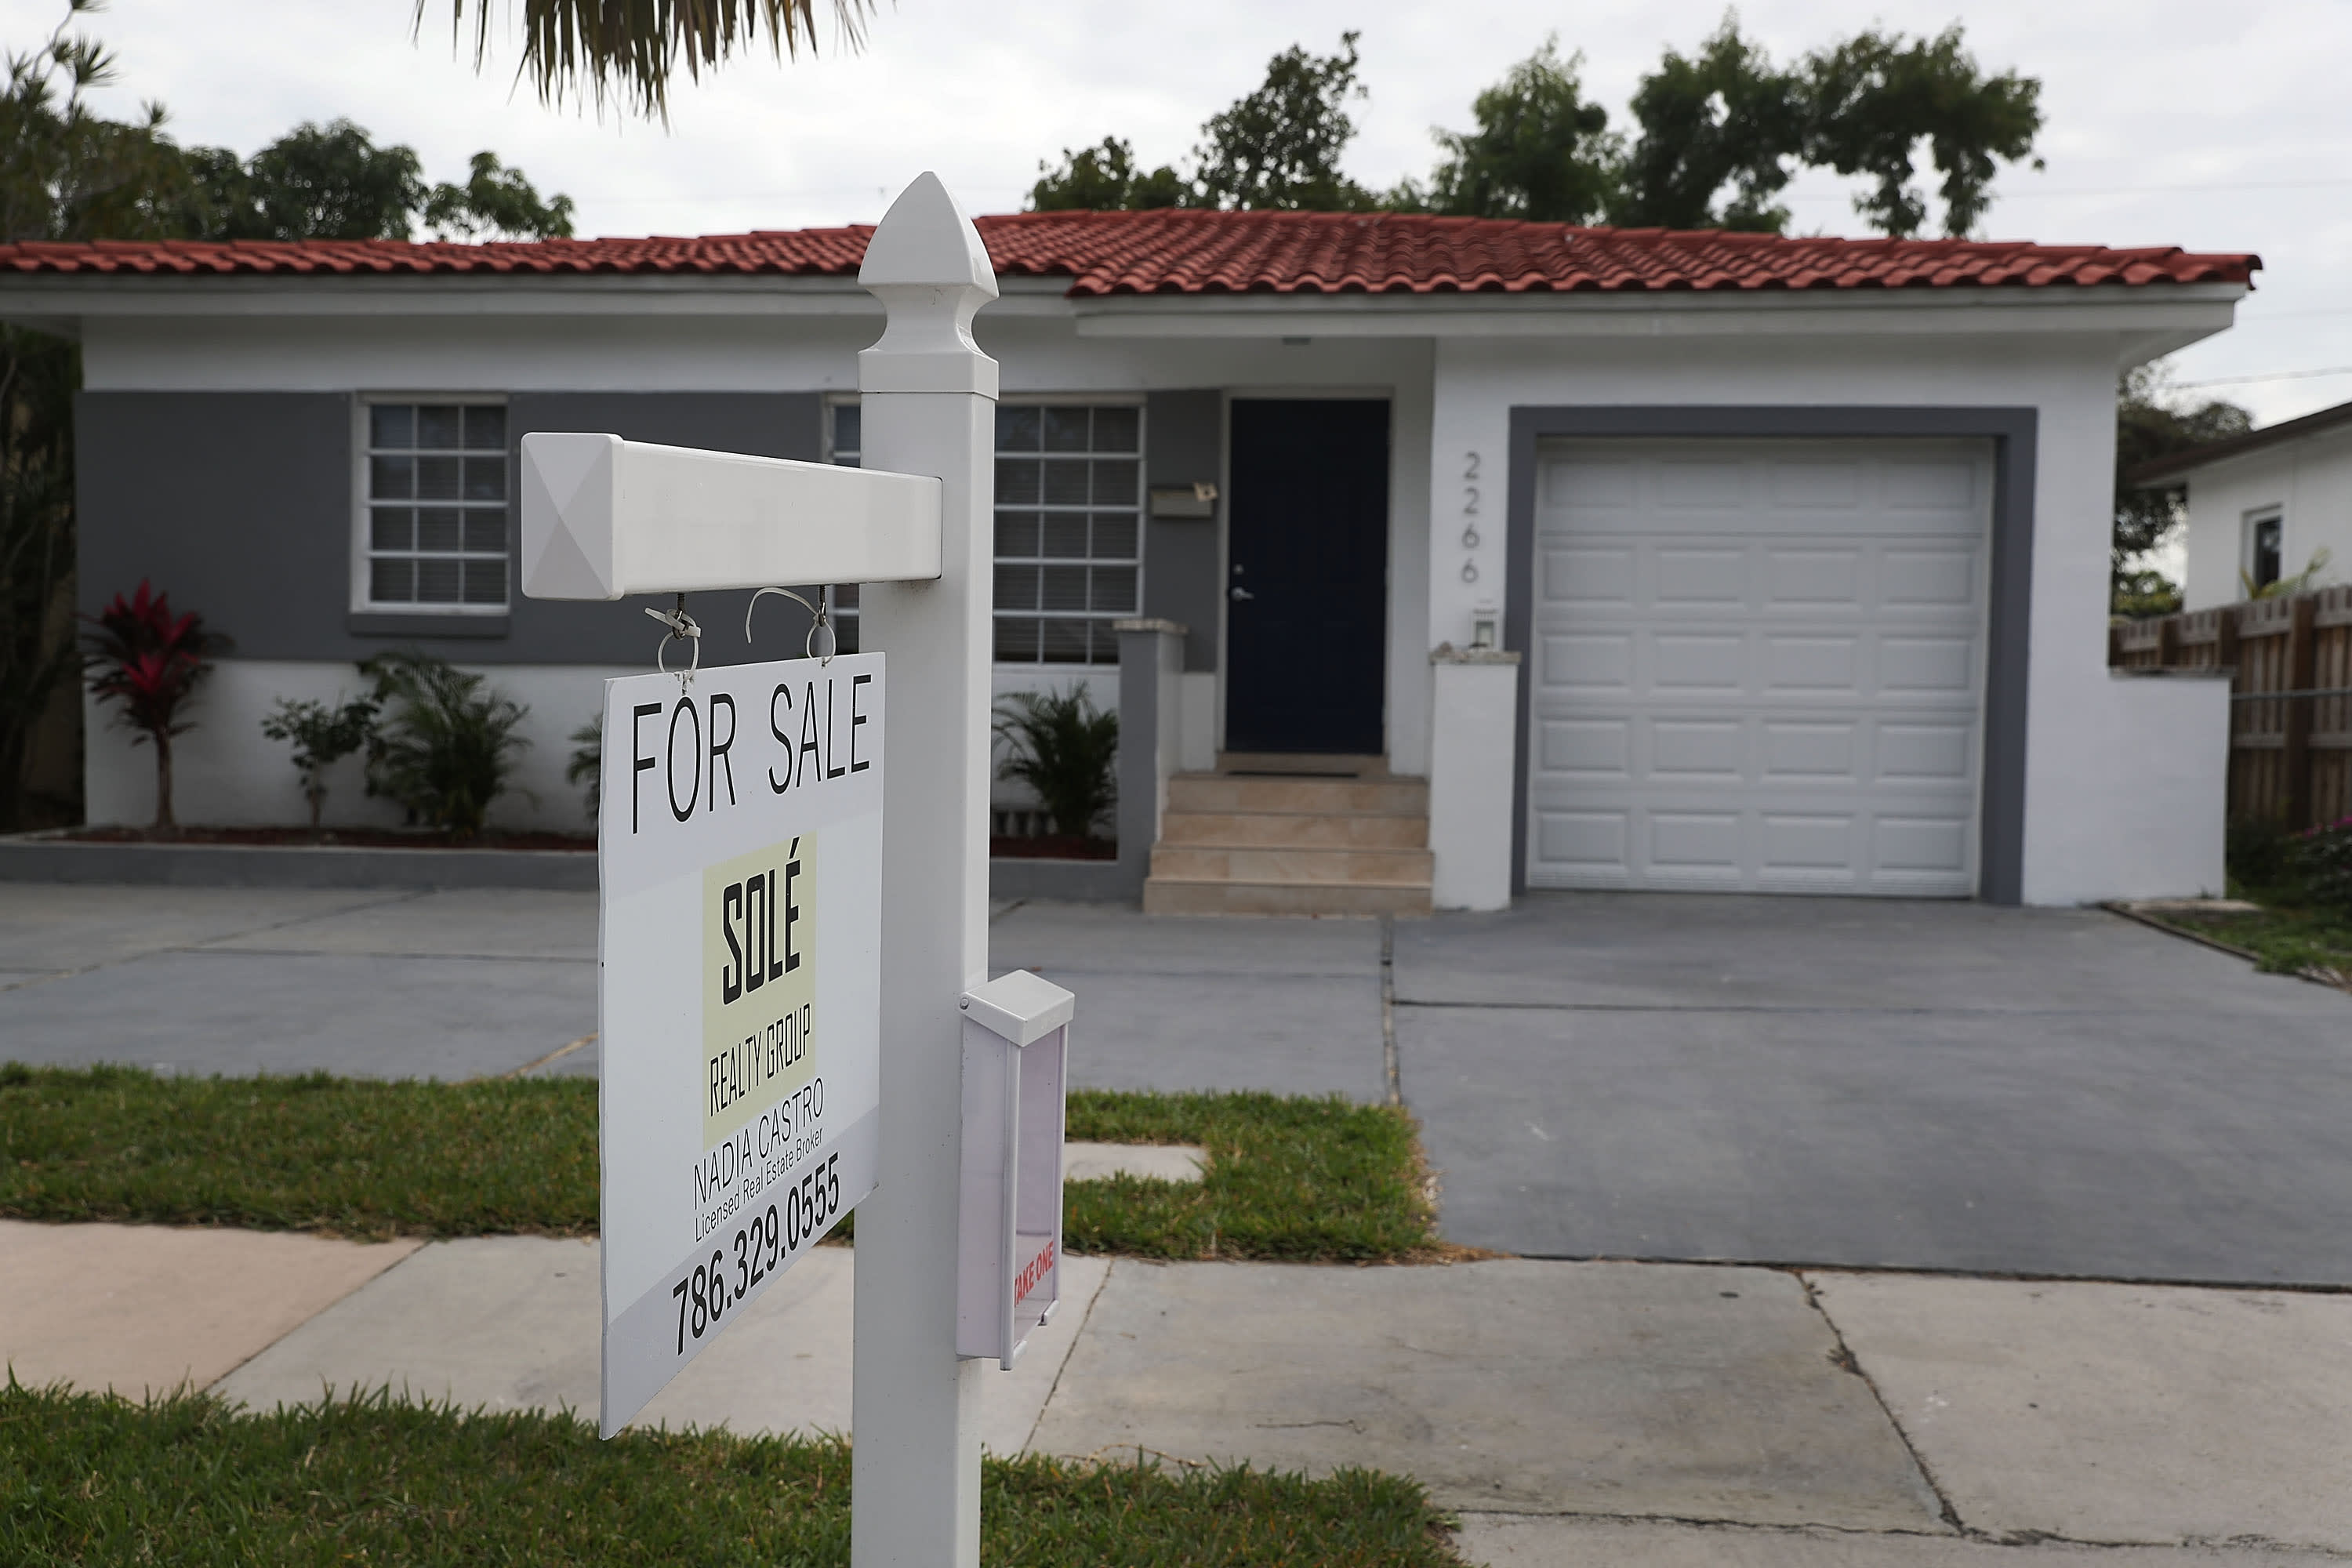 Home prices heated up in April, despite brief sales drop from coronavirus, S&P Case-Shiller says - CNBC